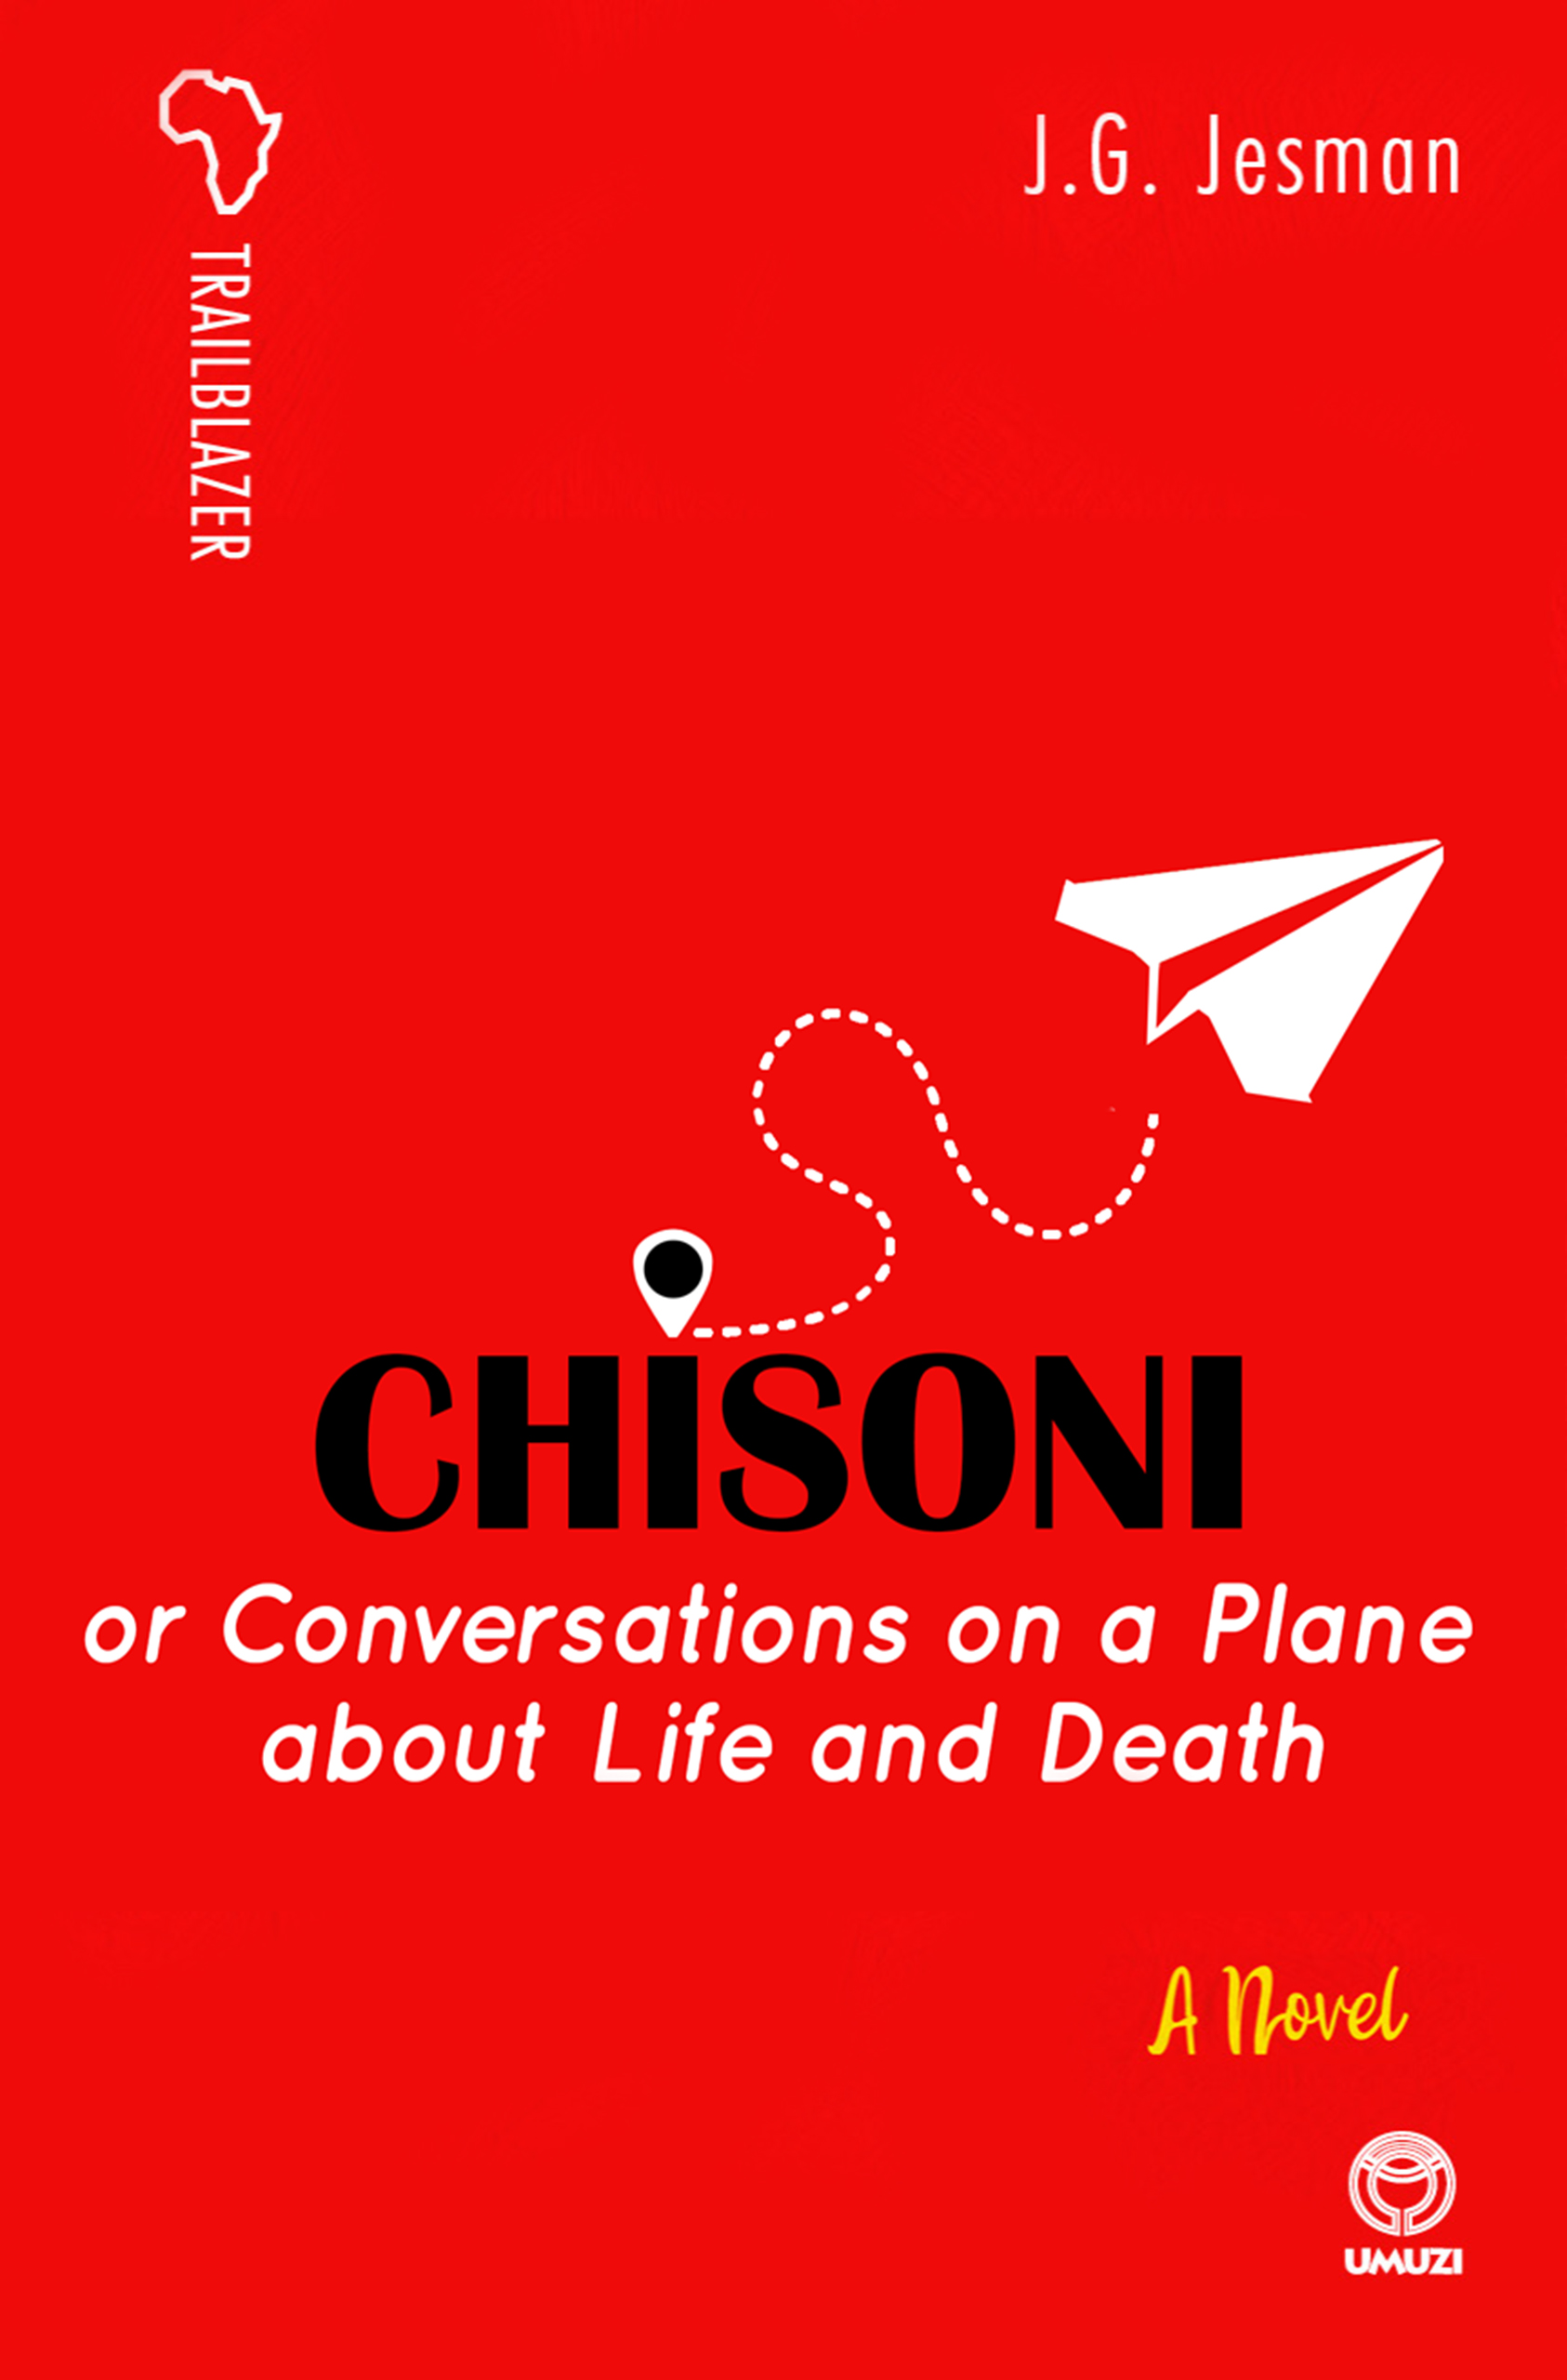 Chisoni, or Conversations on a Plane about Life and Death